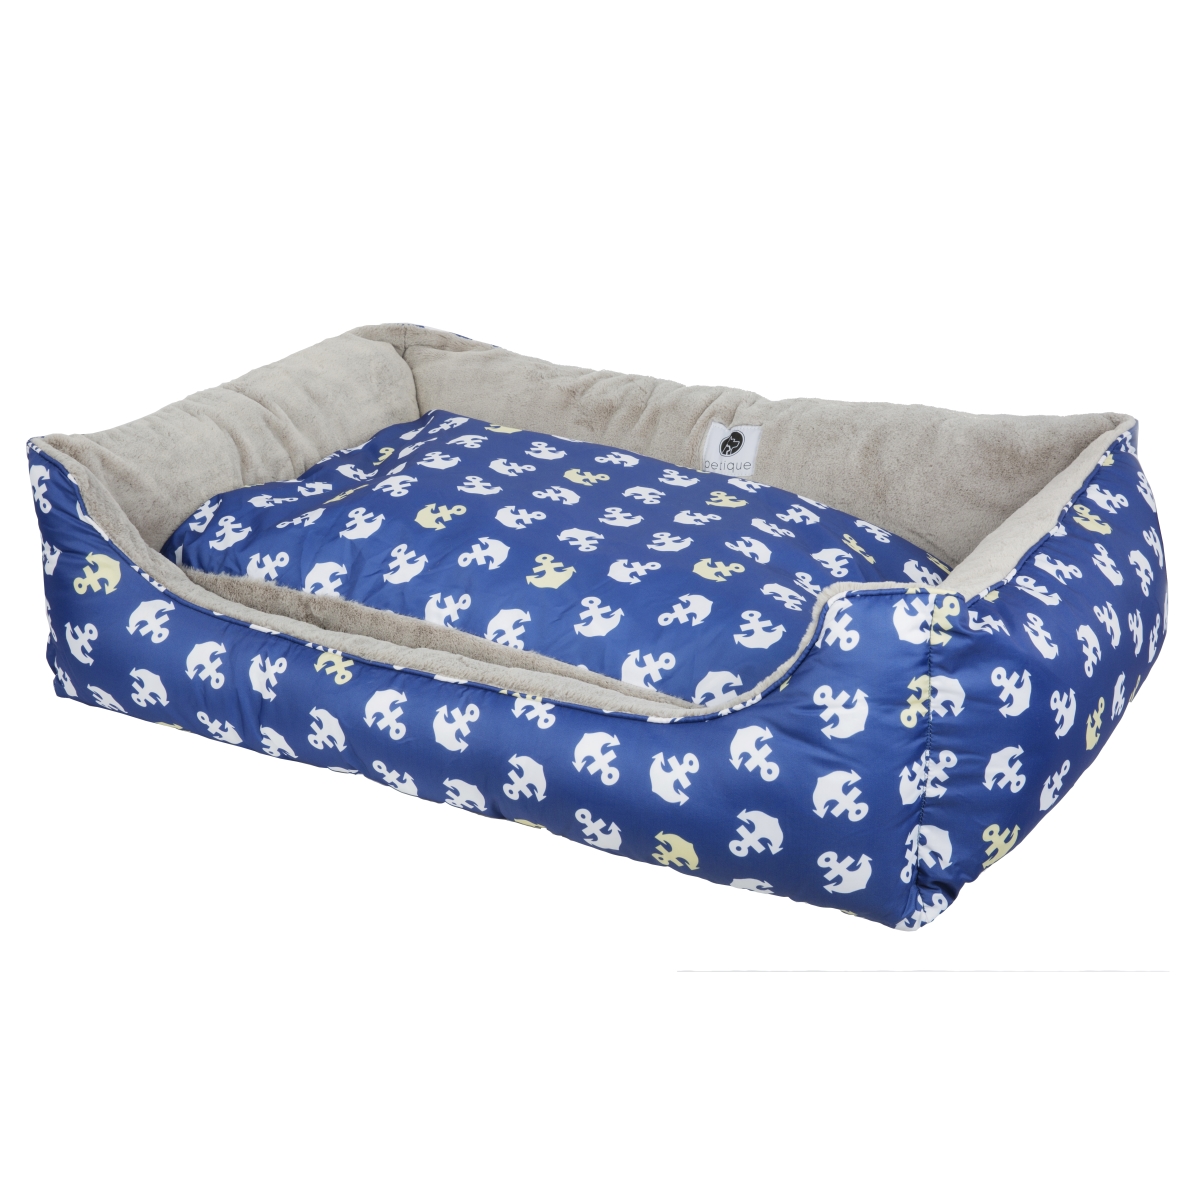 Bd02502006 Anchors Away Reversible Pet Bed, Large & Extra Large